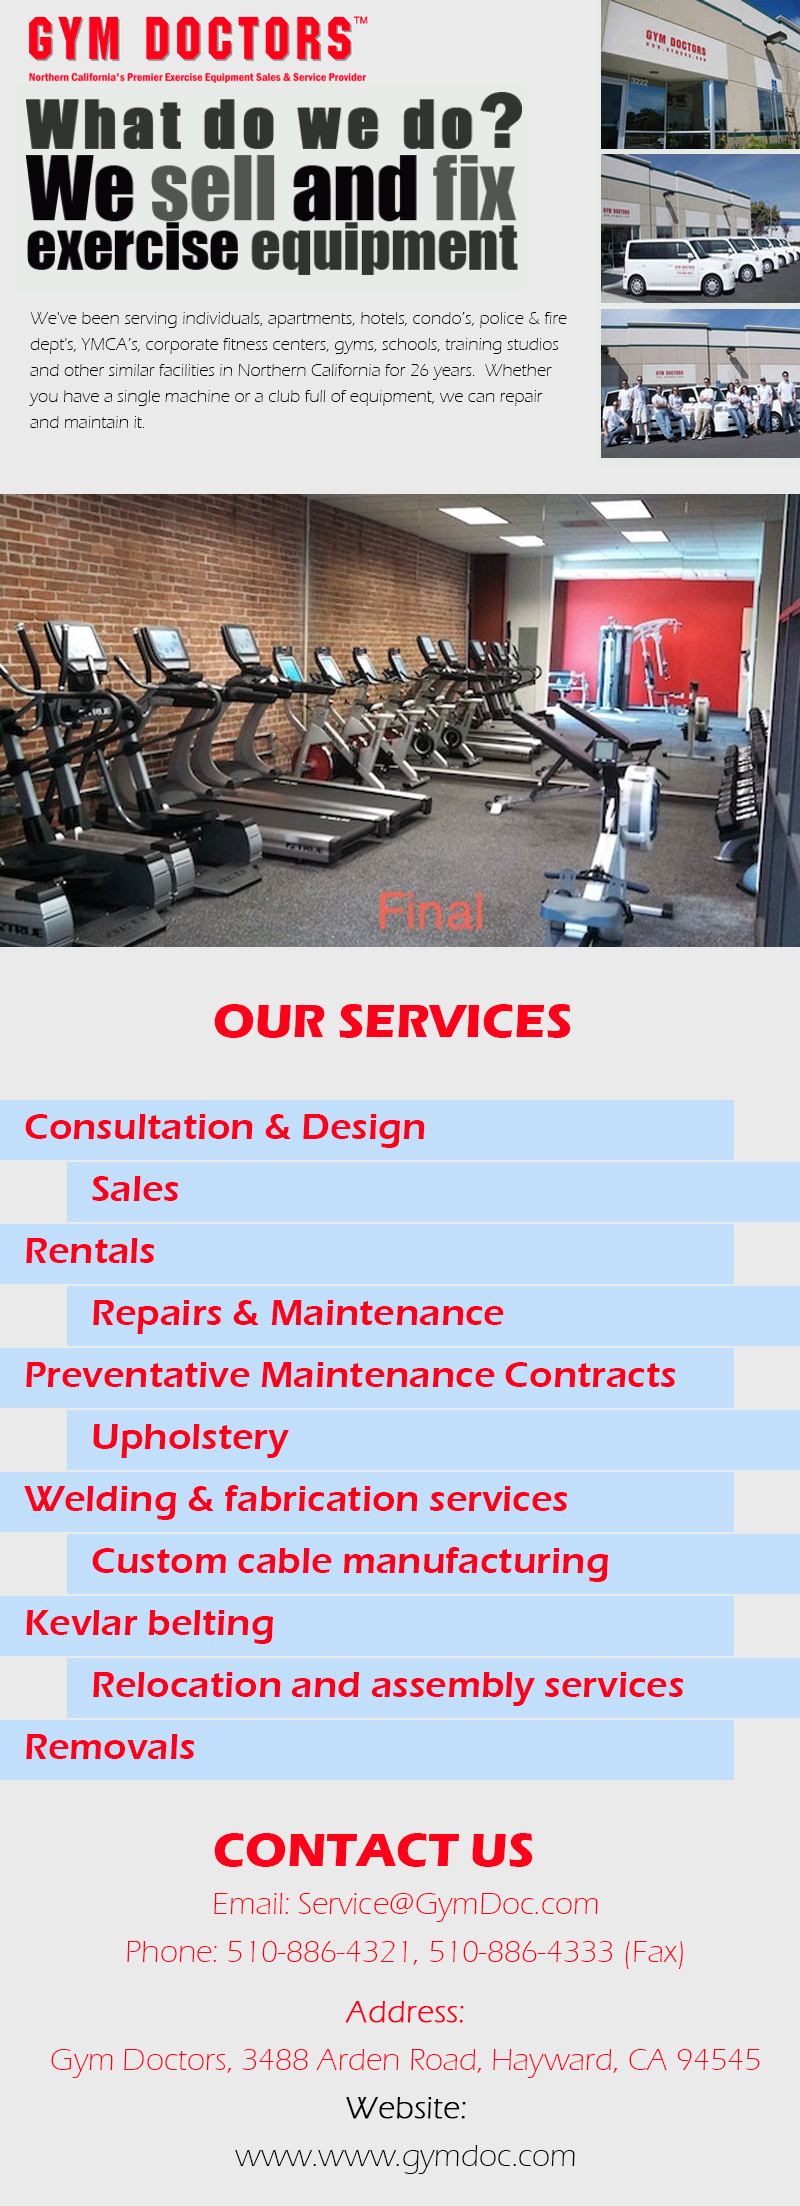 Fitness Equipment Service We’re a full fitness equipment repair service shop, on-site factory authorized service provider and parts dealer. For more info at https://www.gymdoc.com by gymdoctors